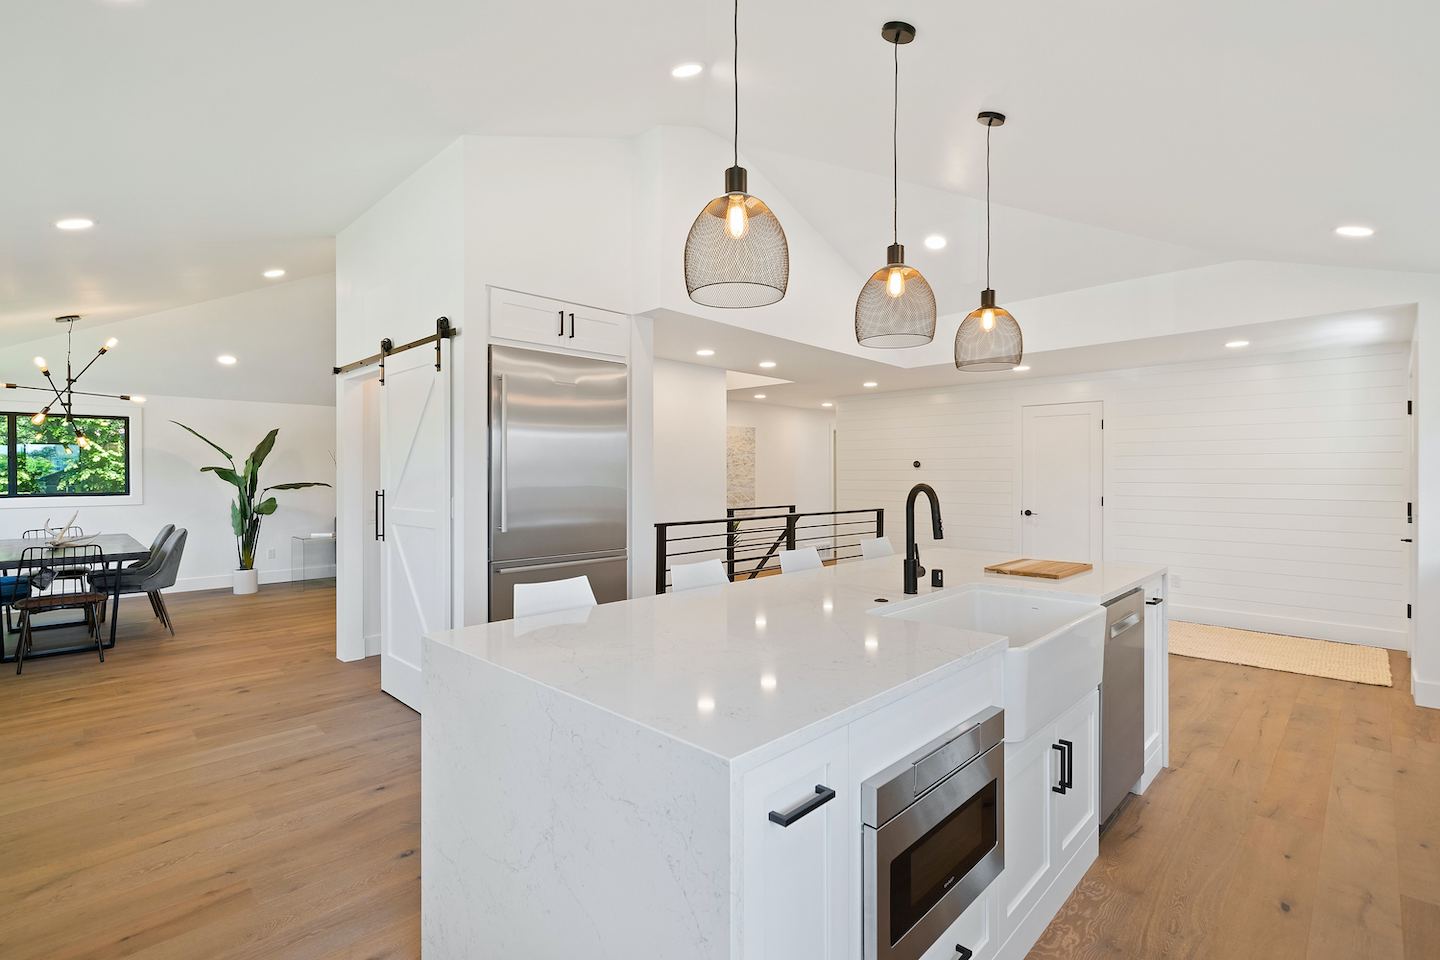 Kitchen area with three pendant lights, a chandelier, and multiple recessed lights.